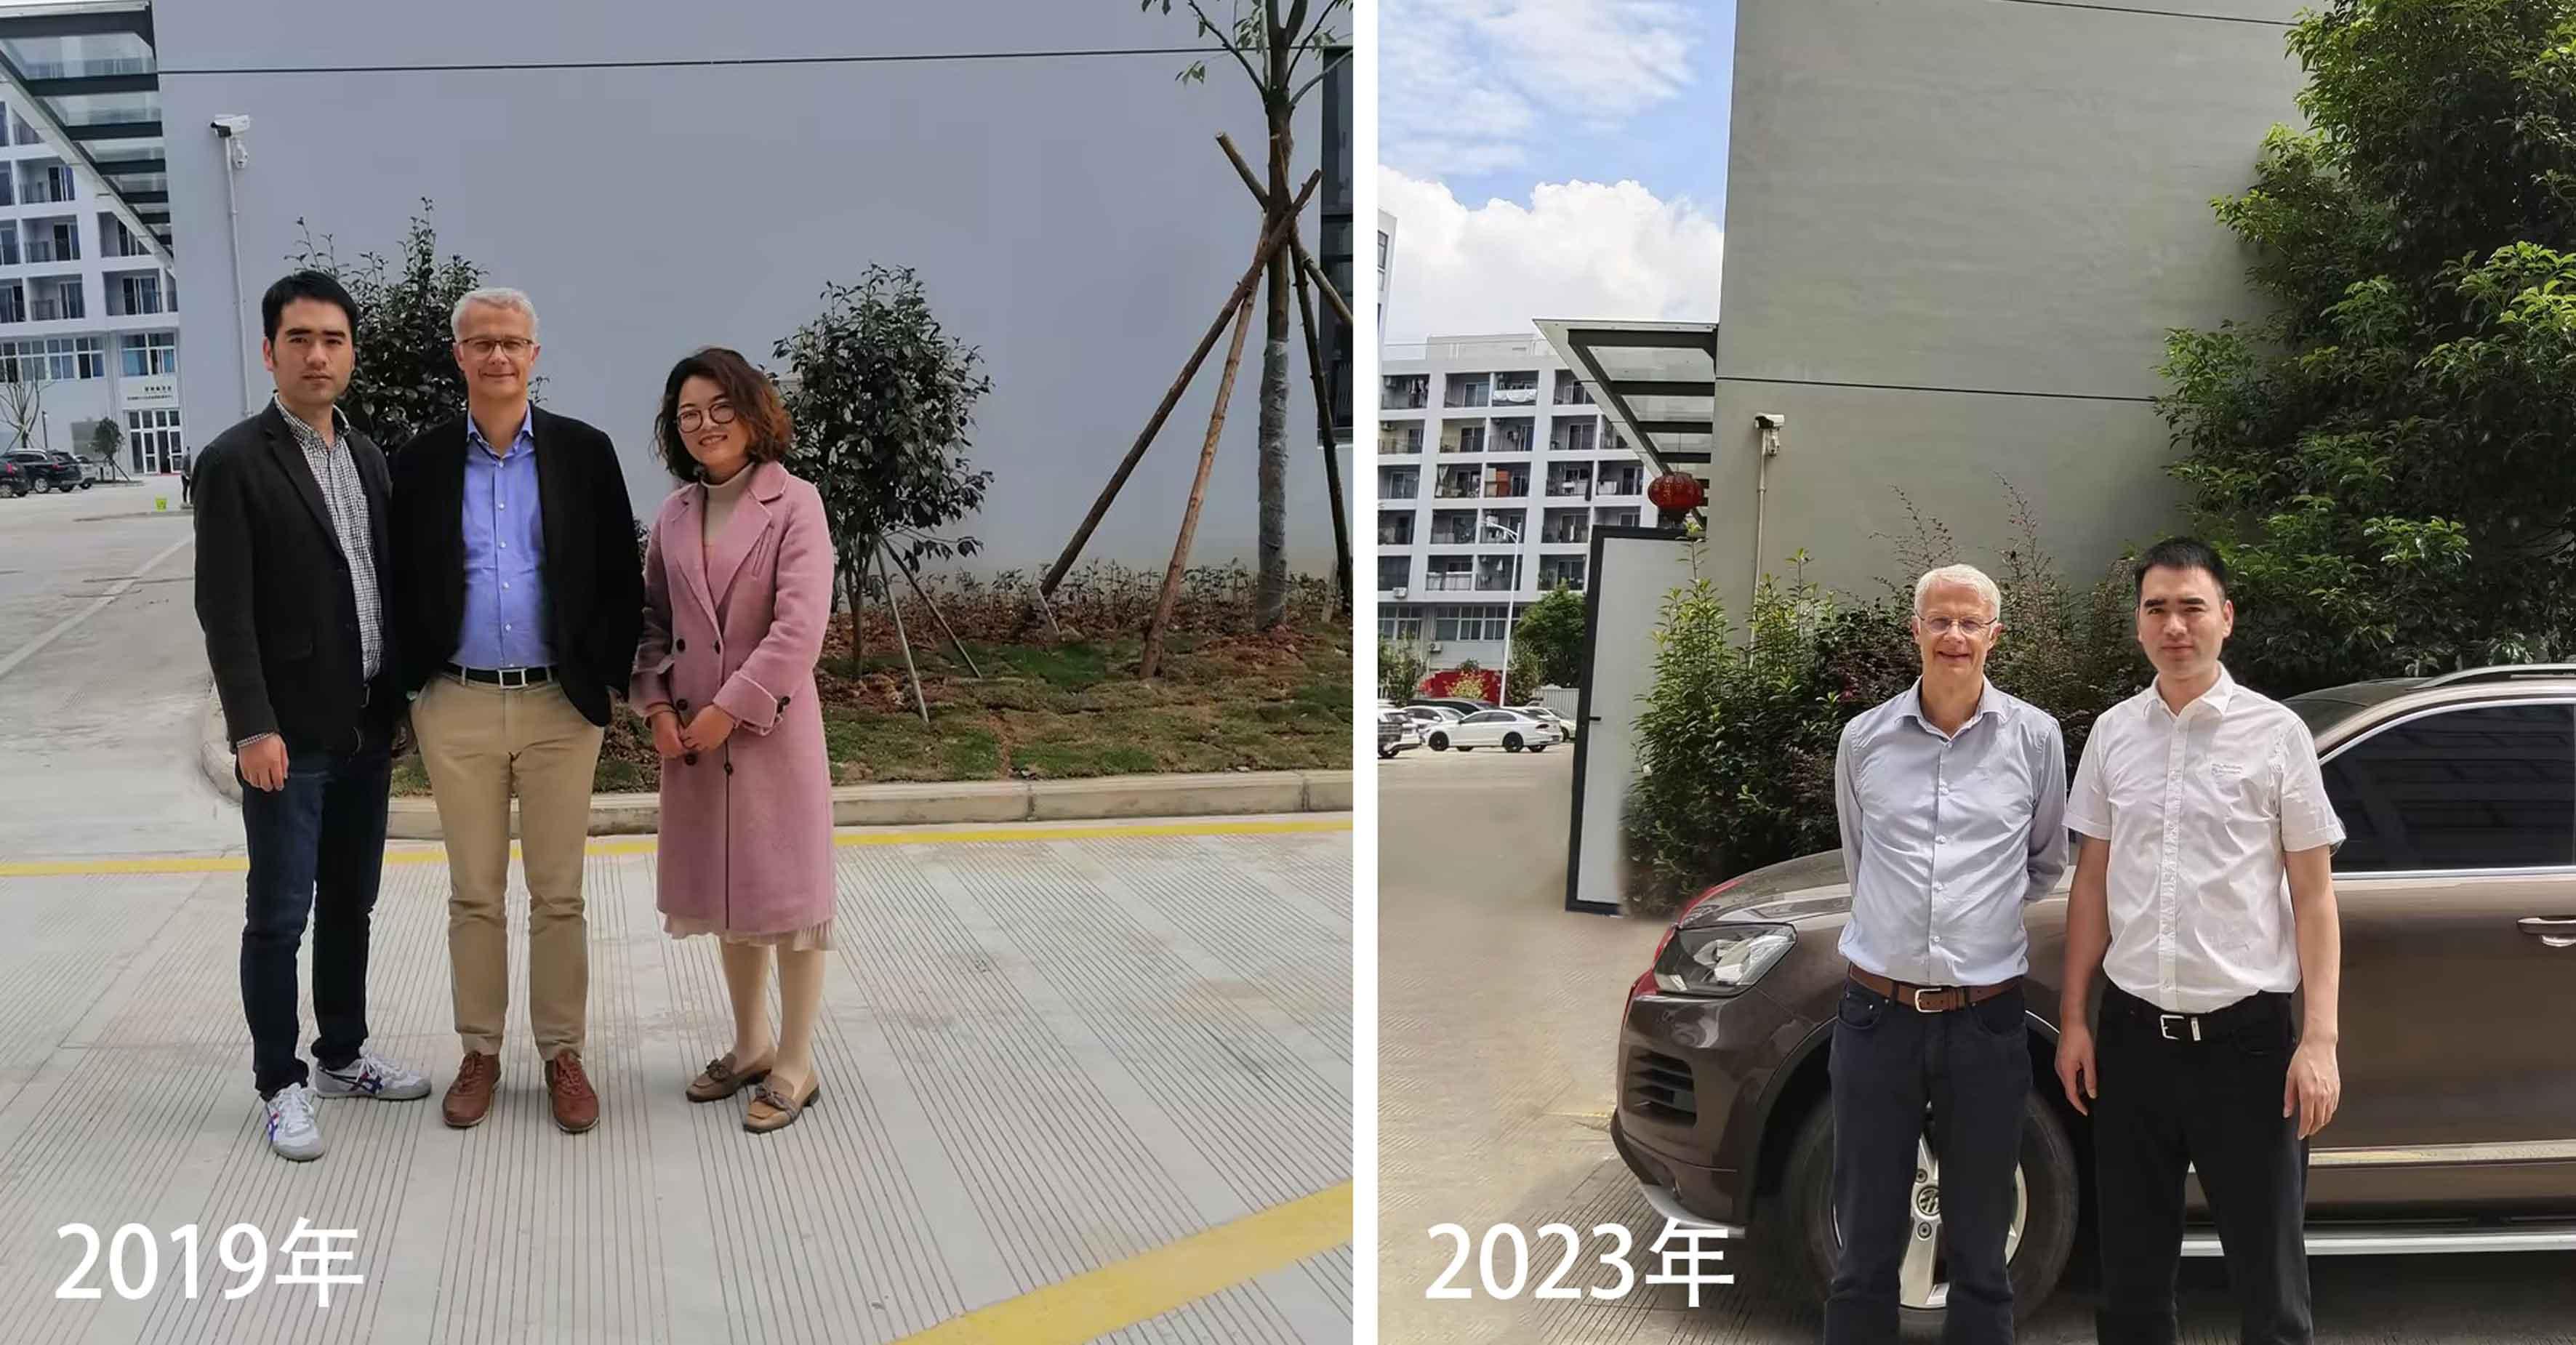 The 4-year time machine from 2019 to 2023 - the French customer visited Tonhe